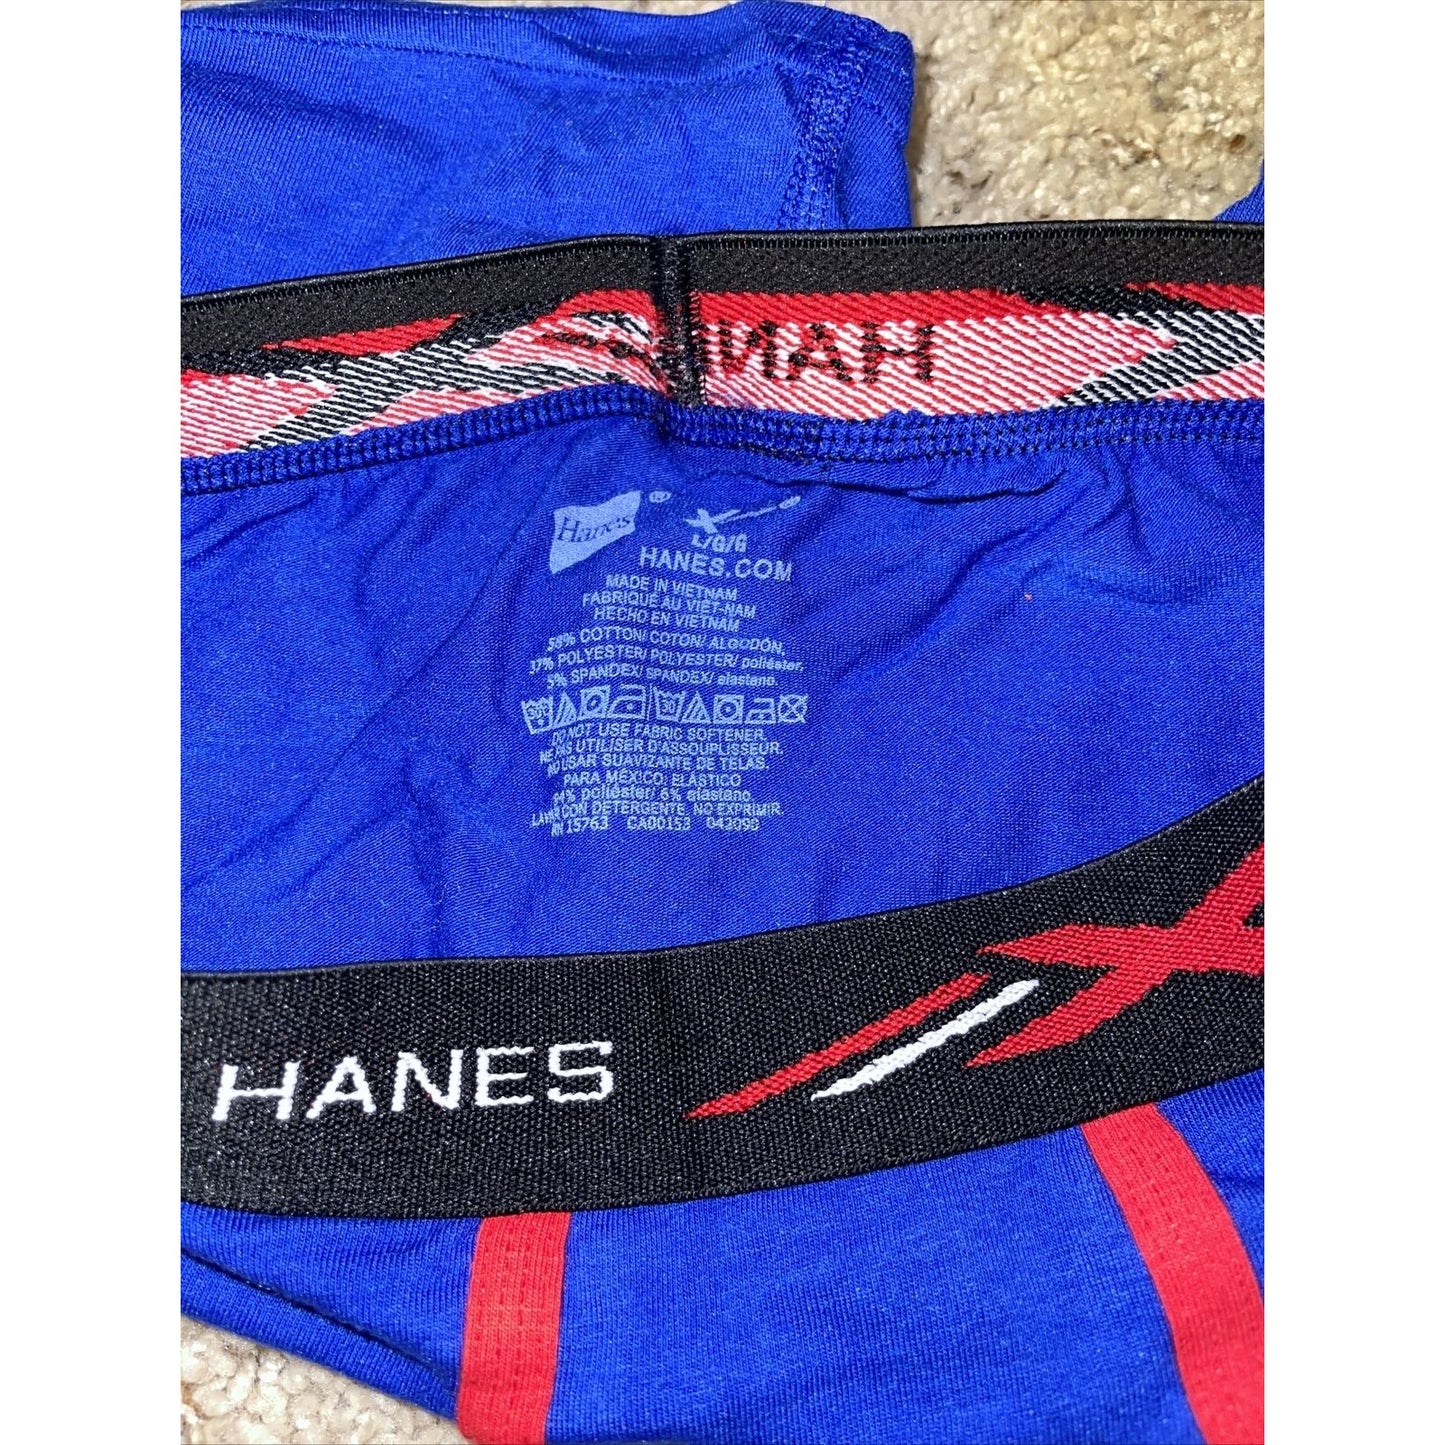 boy's teen large hanes x-temp blue and red compression boxer shorts